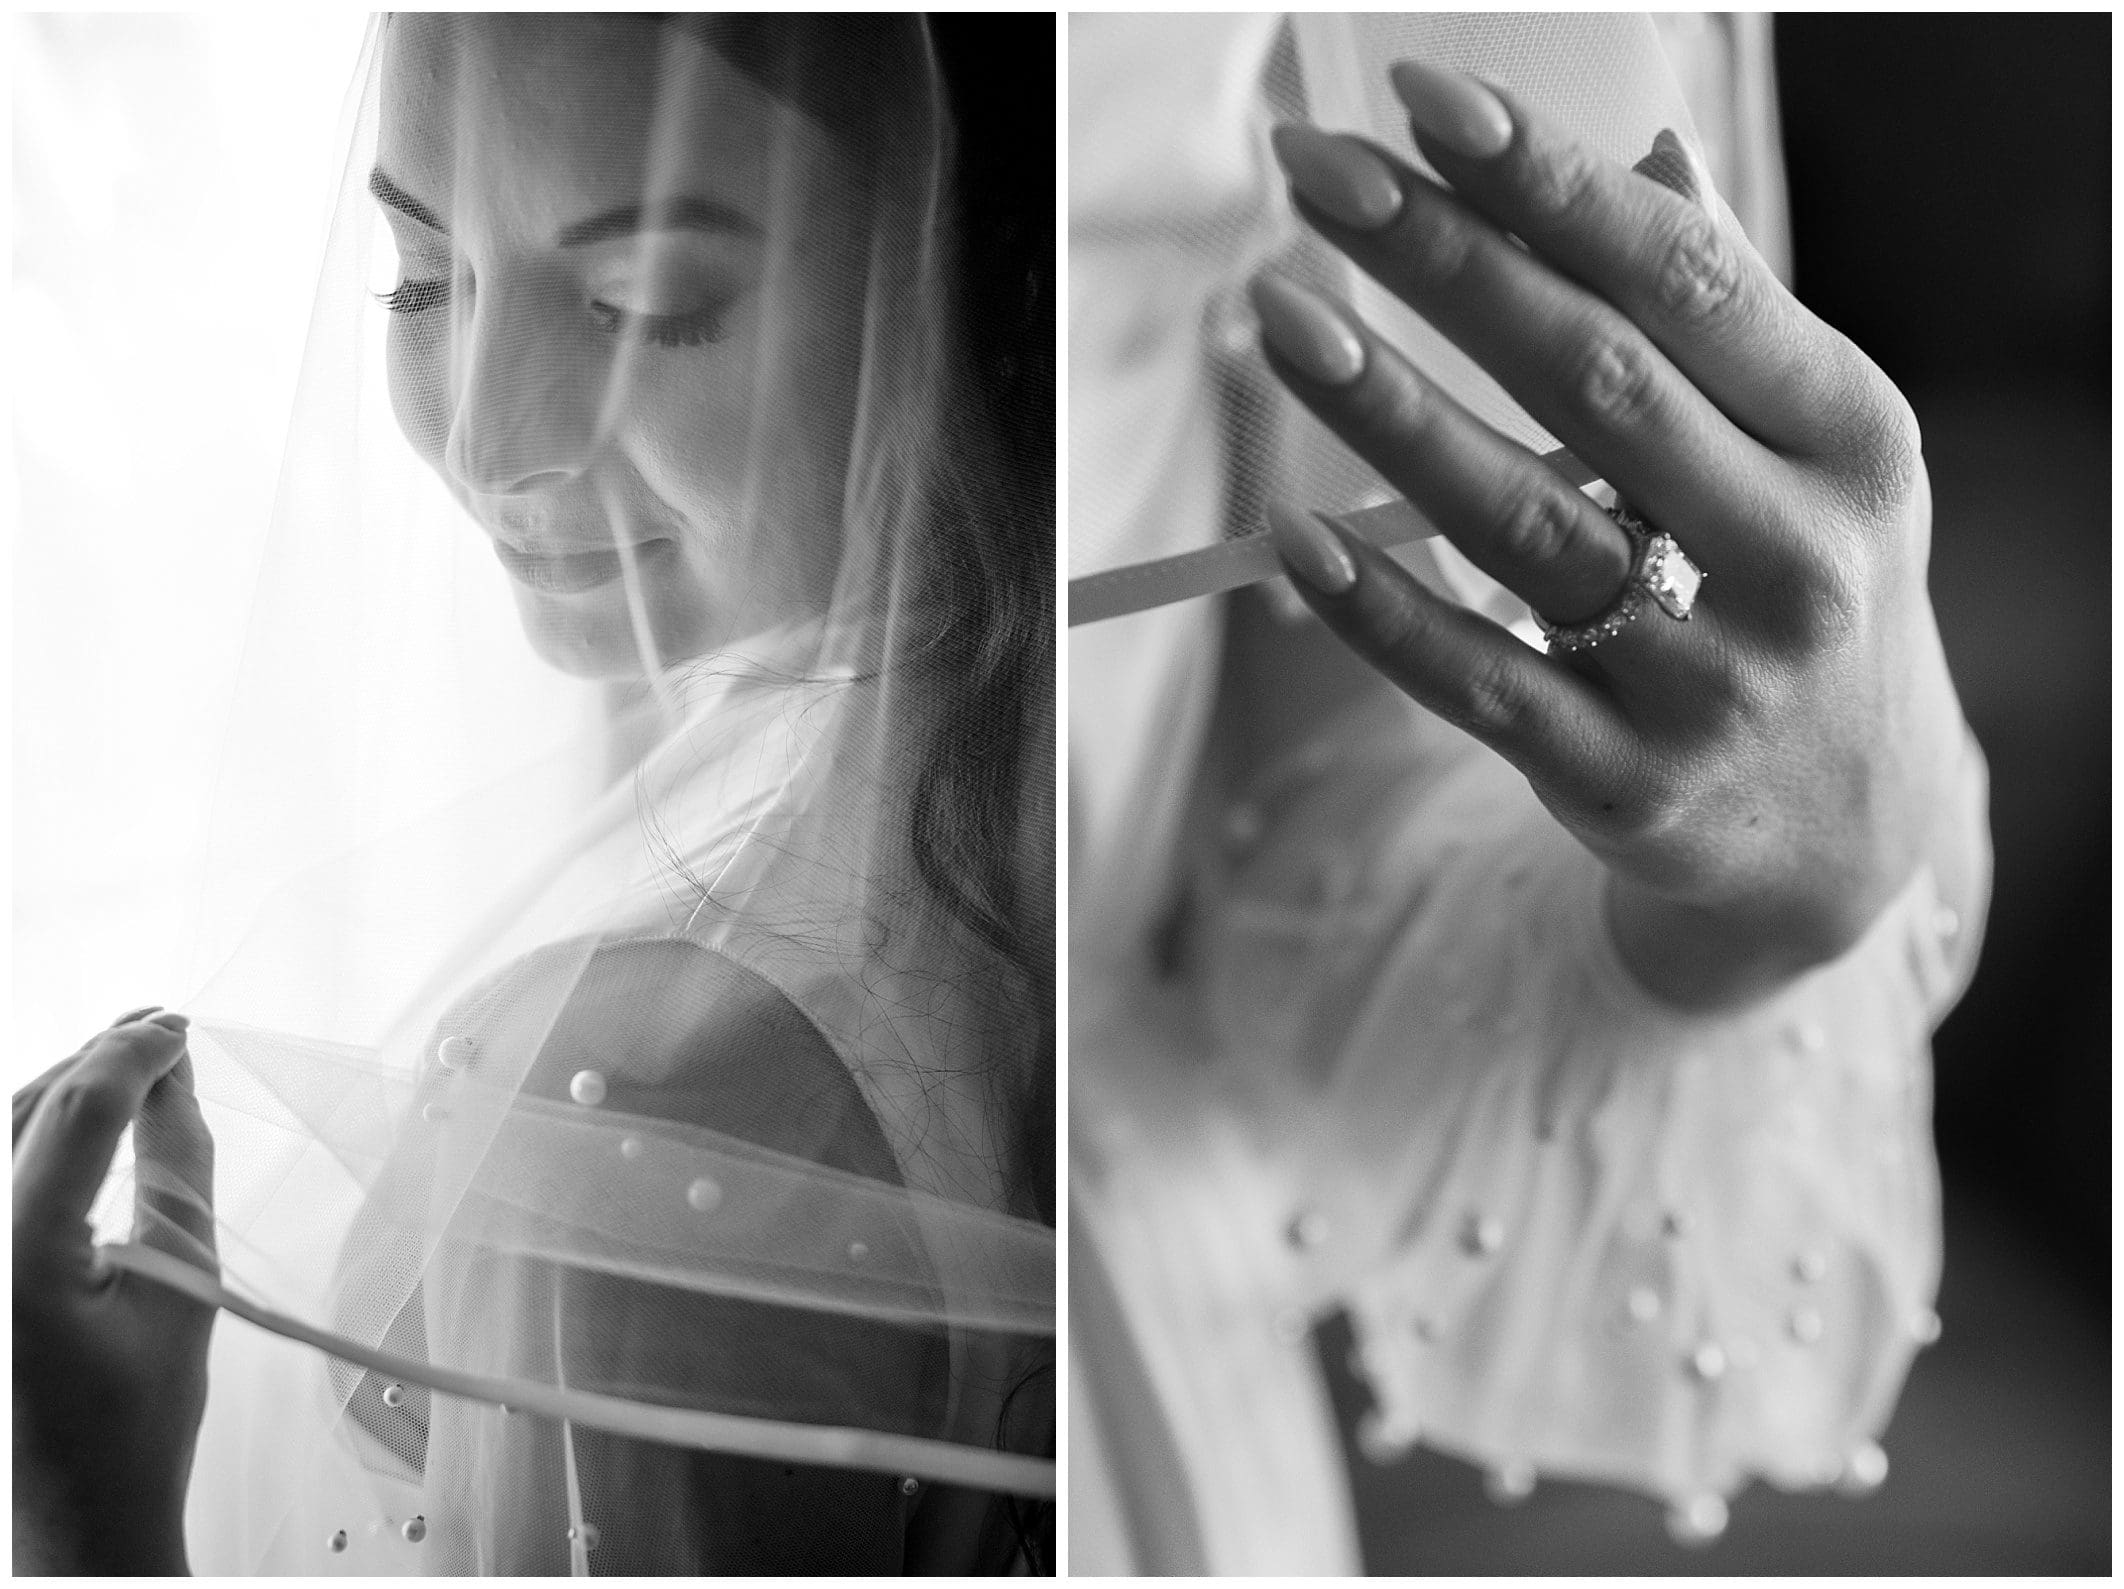 Split-image of a bride: left side shows her smiling under a veil, right side focuses on her hand displaying a wedding ring.